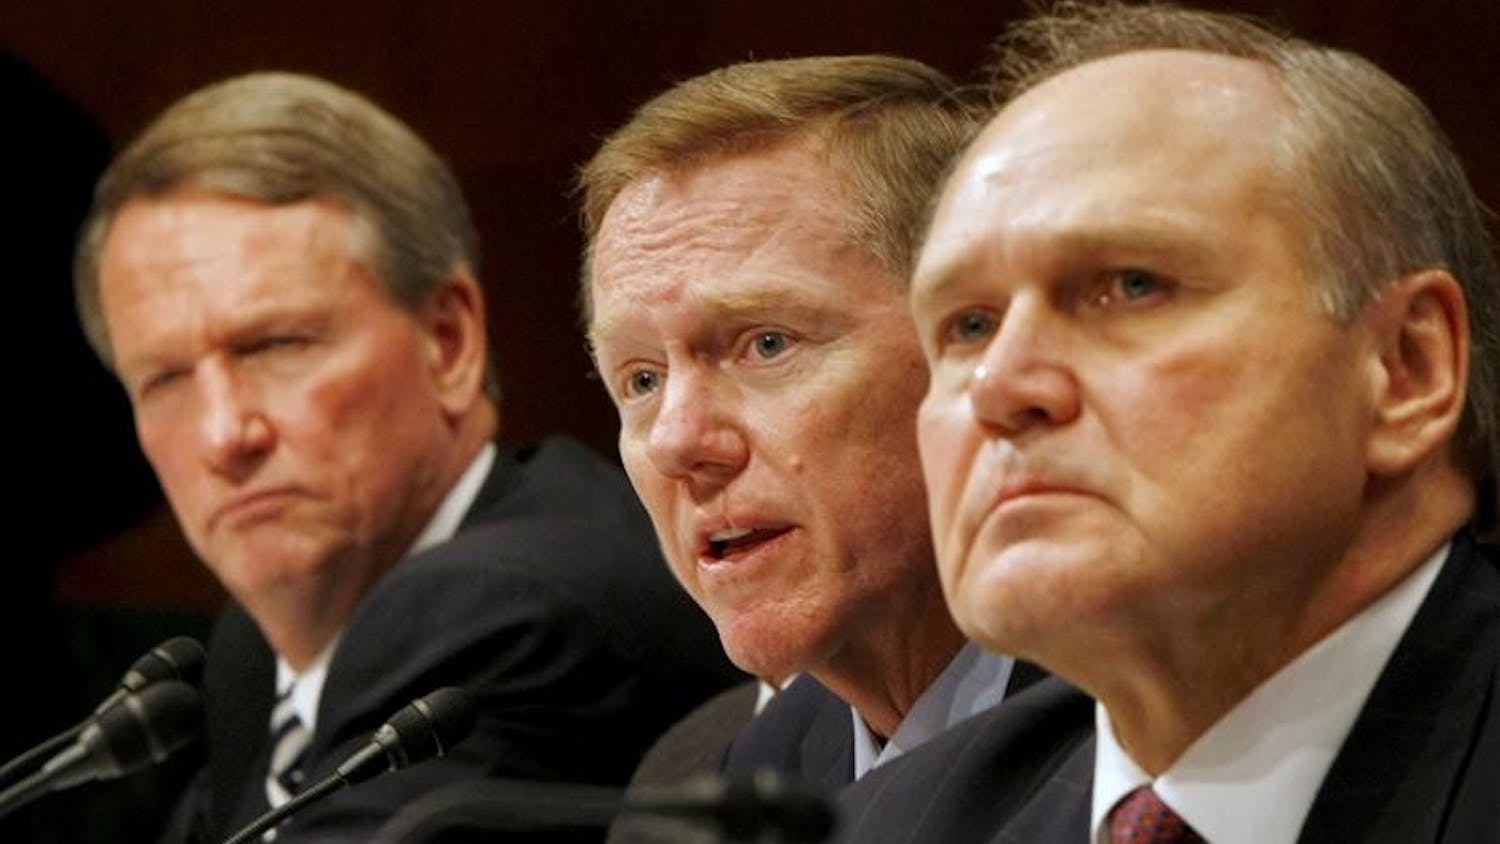 Ford Chief Executive Officer Alan Mulally, center, flanked by General Motors Chief Executive Officer Richard Wagoner, left, and Chrysler Chief Executive Officer Robert Nardelli, testifies Wednesday on Capitol Hill before a Senate Banking Committee hearing on a proposed auto industry bailout.